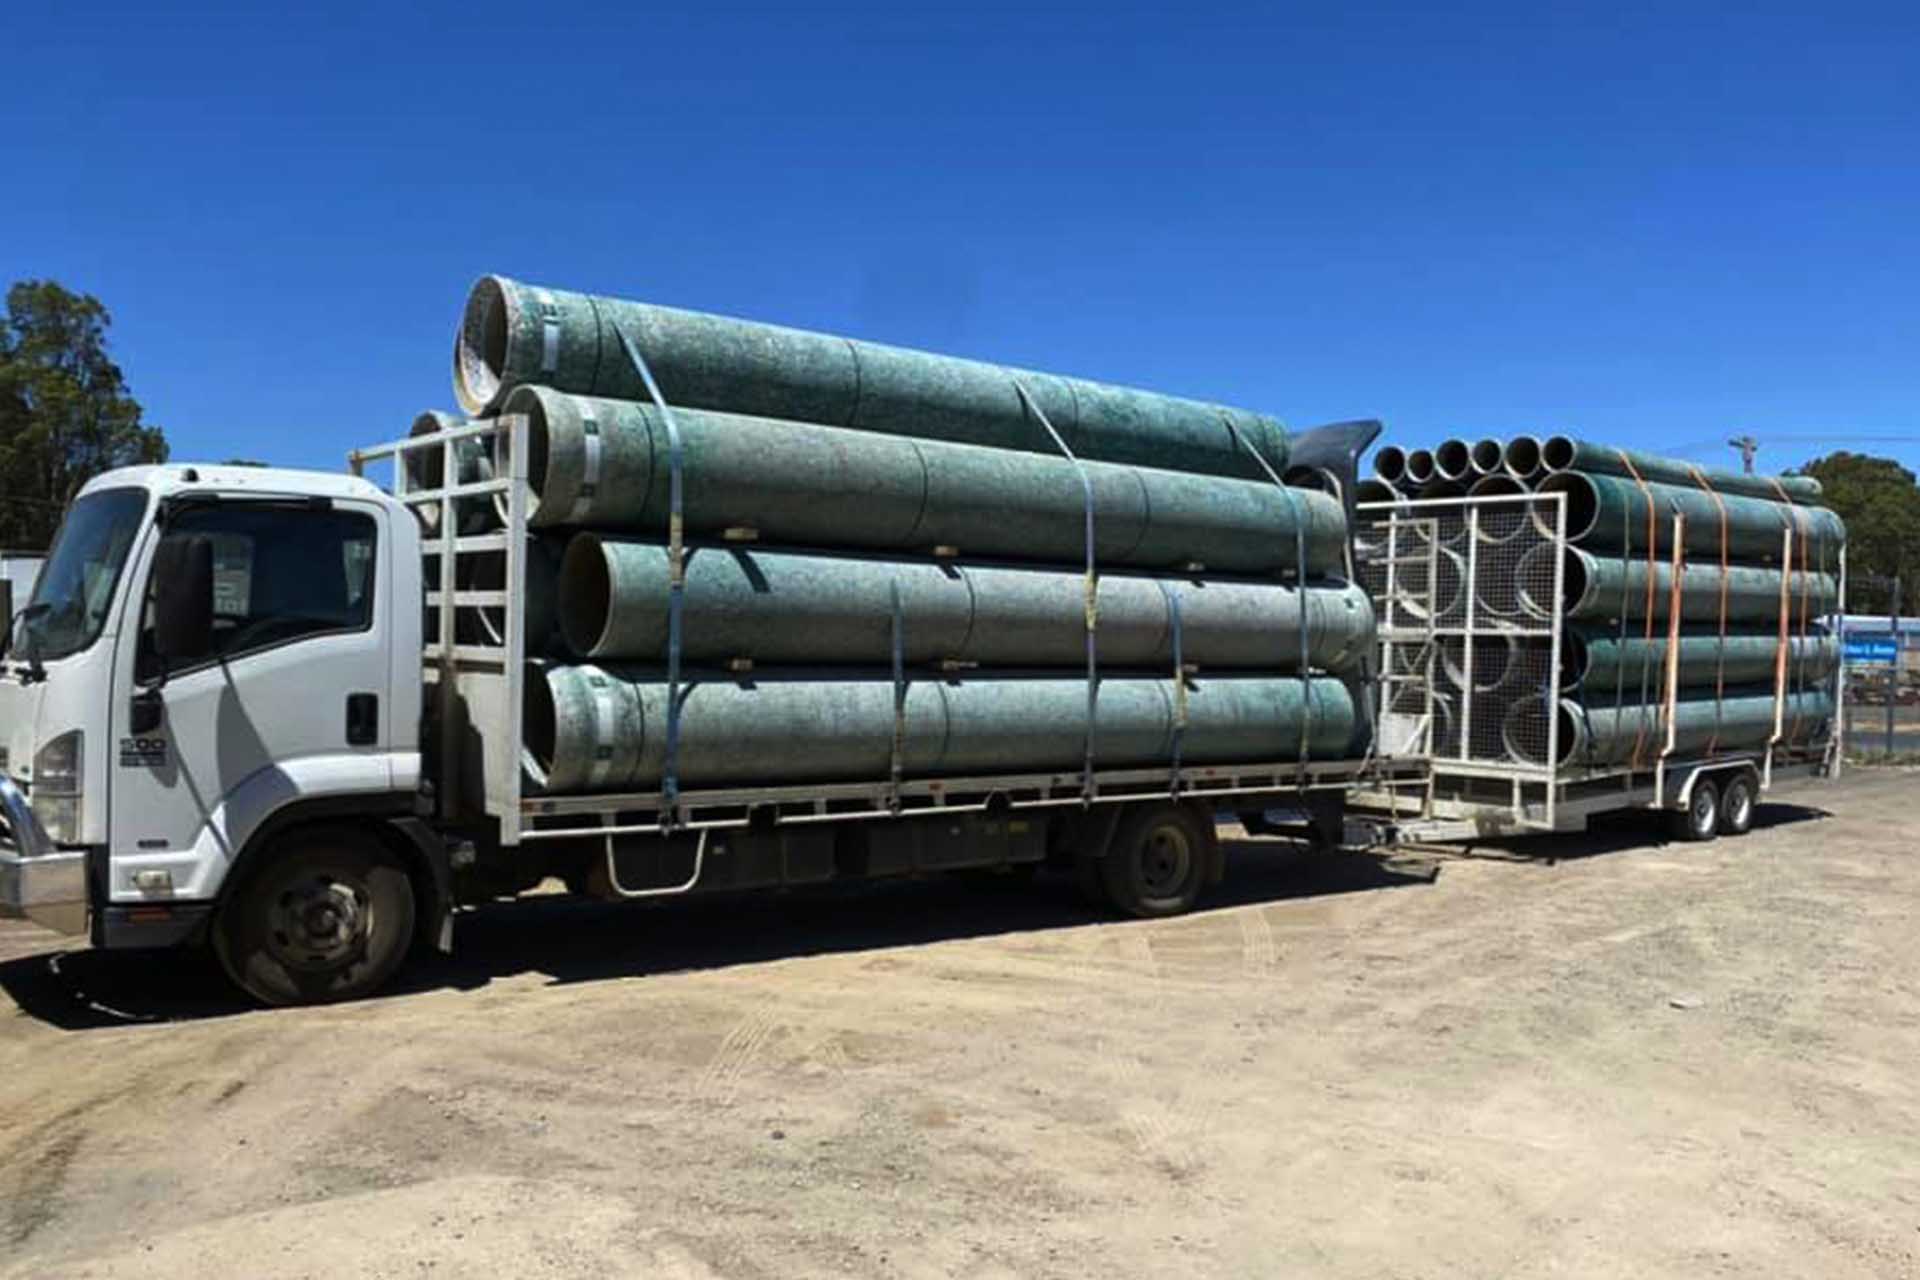 The Green Pipe irrigation, drainage and stormwater pipes truck load